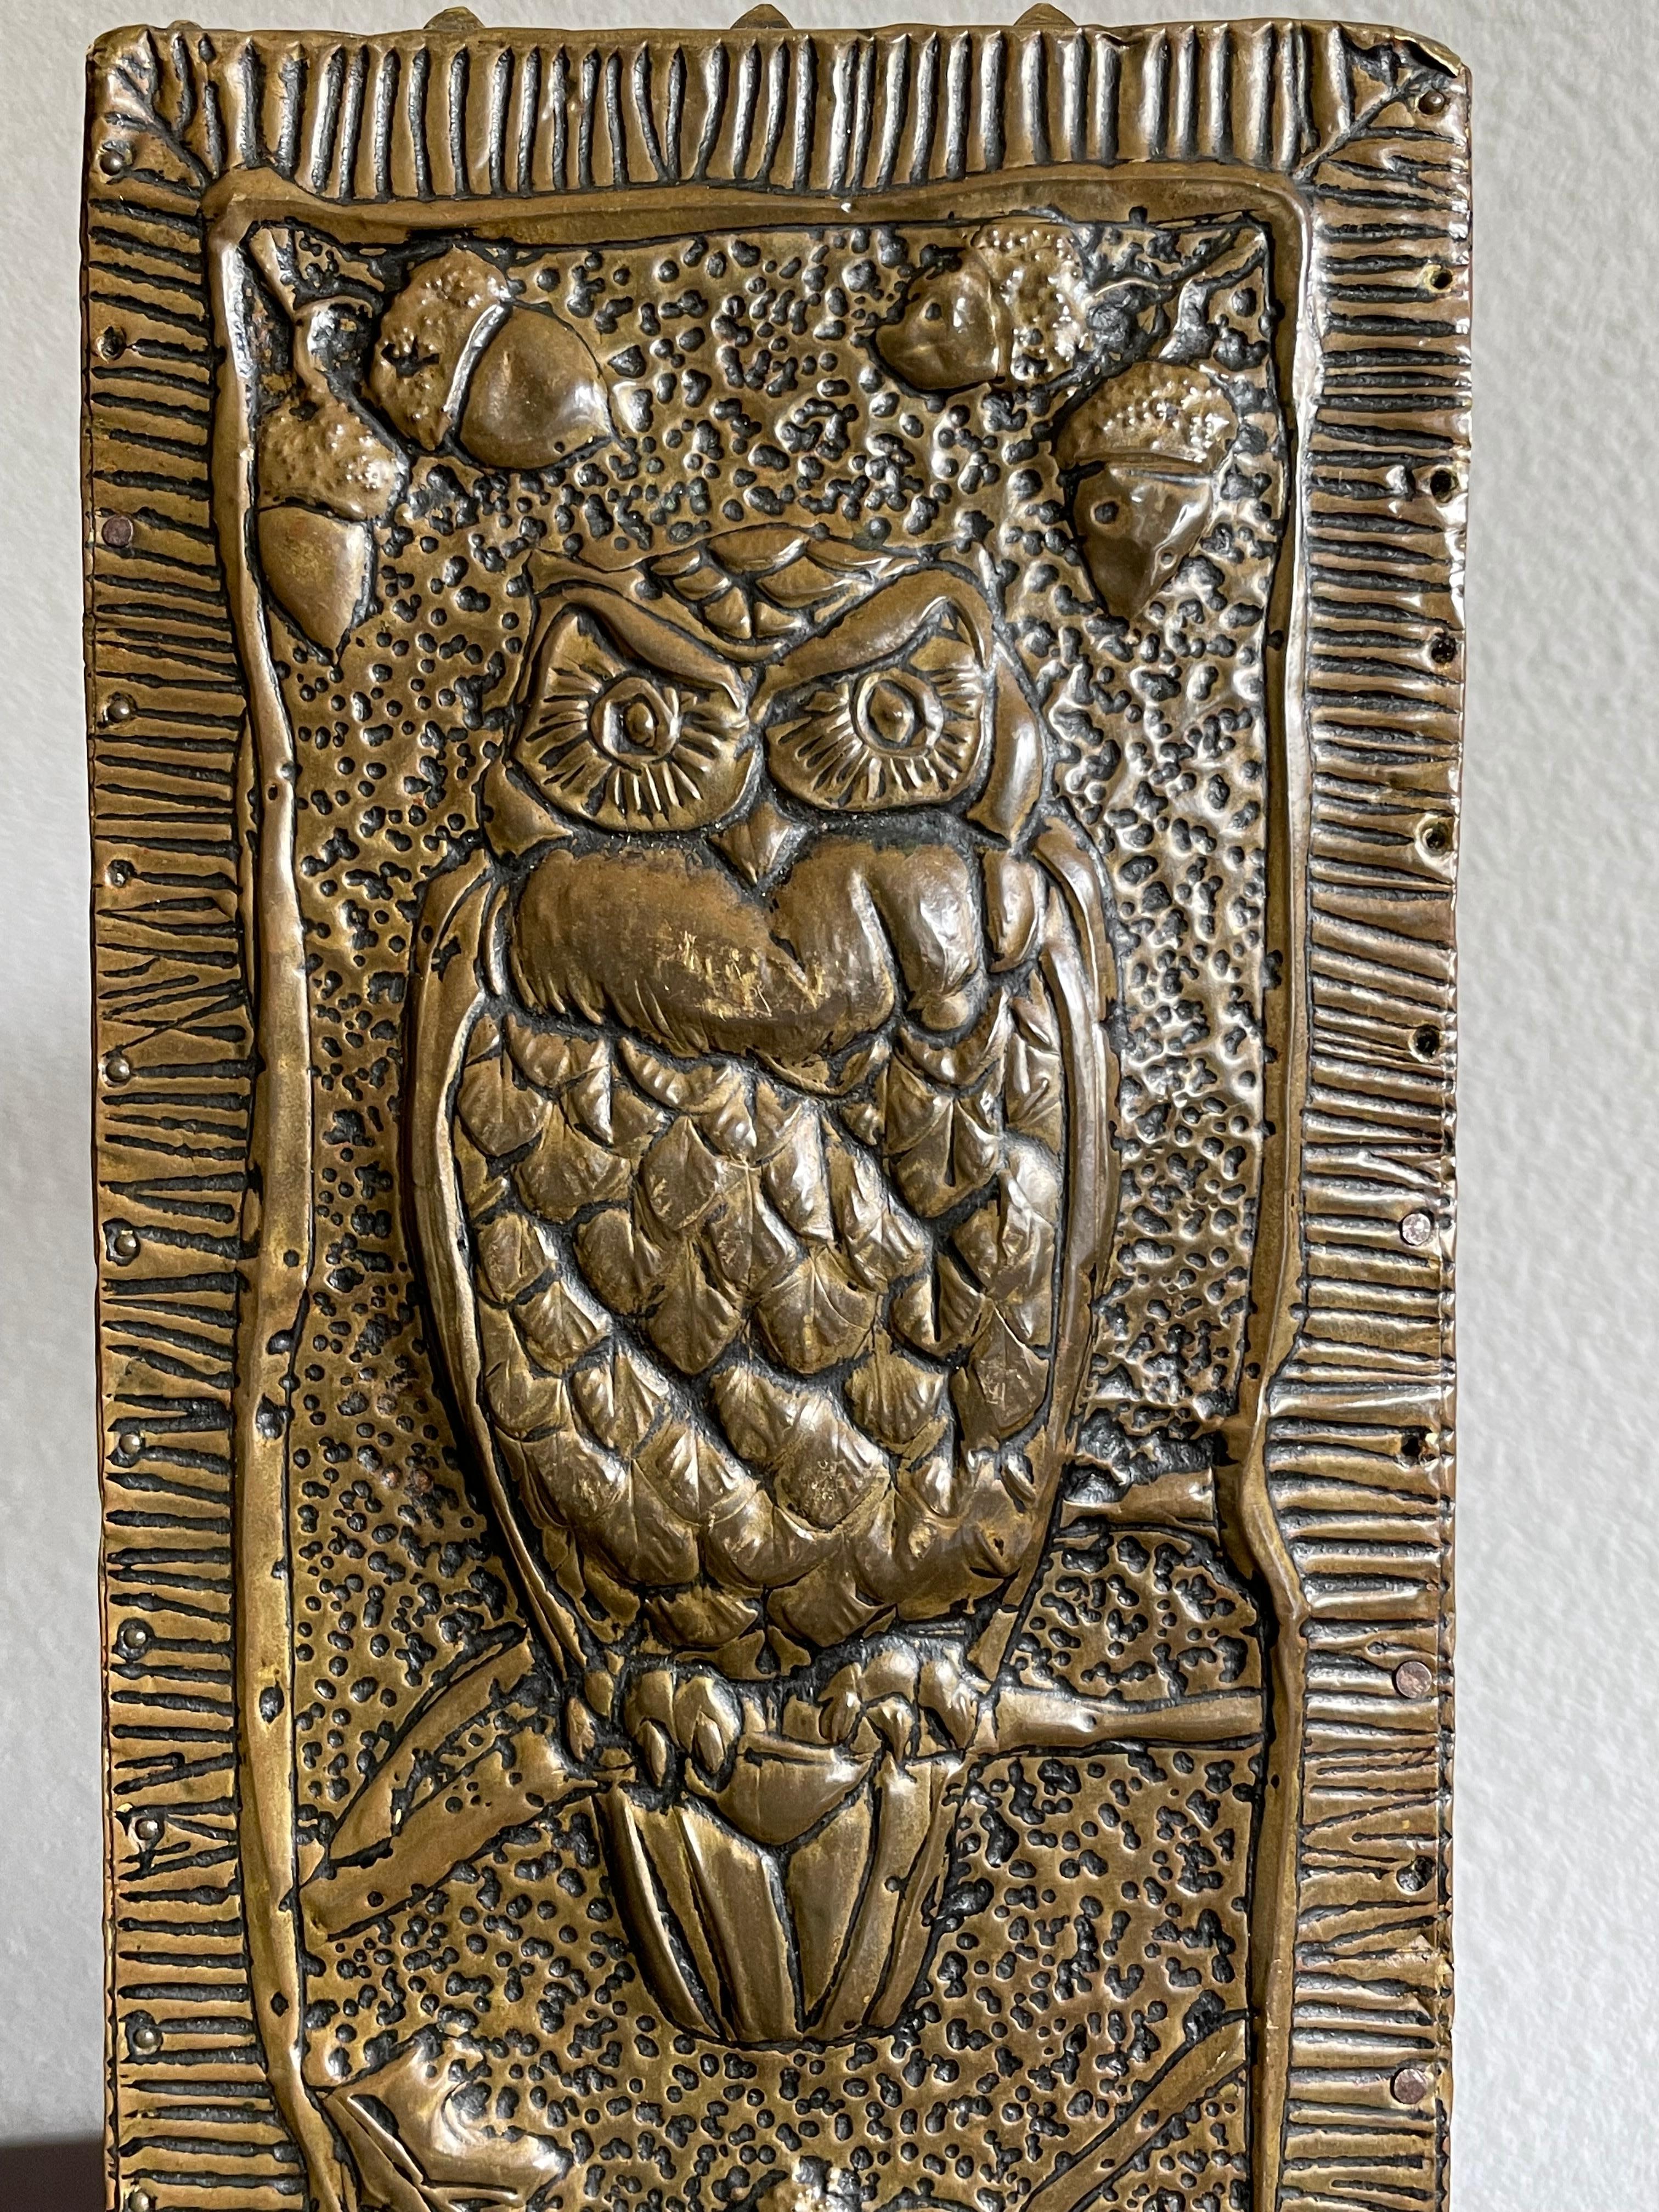 Wonderful early 20th century craftsmanship with 8 owls in oak trees.

Finding the most beautiful and rarest antiques in the best possible condition is what we dream of and we have been very fortunate to have had many dreams come true. When you look